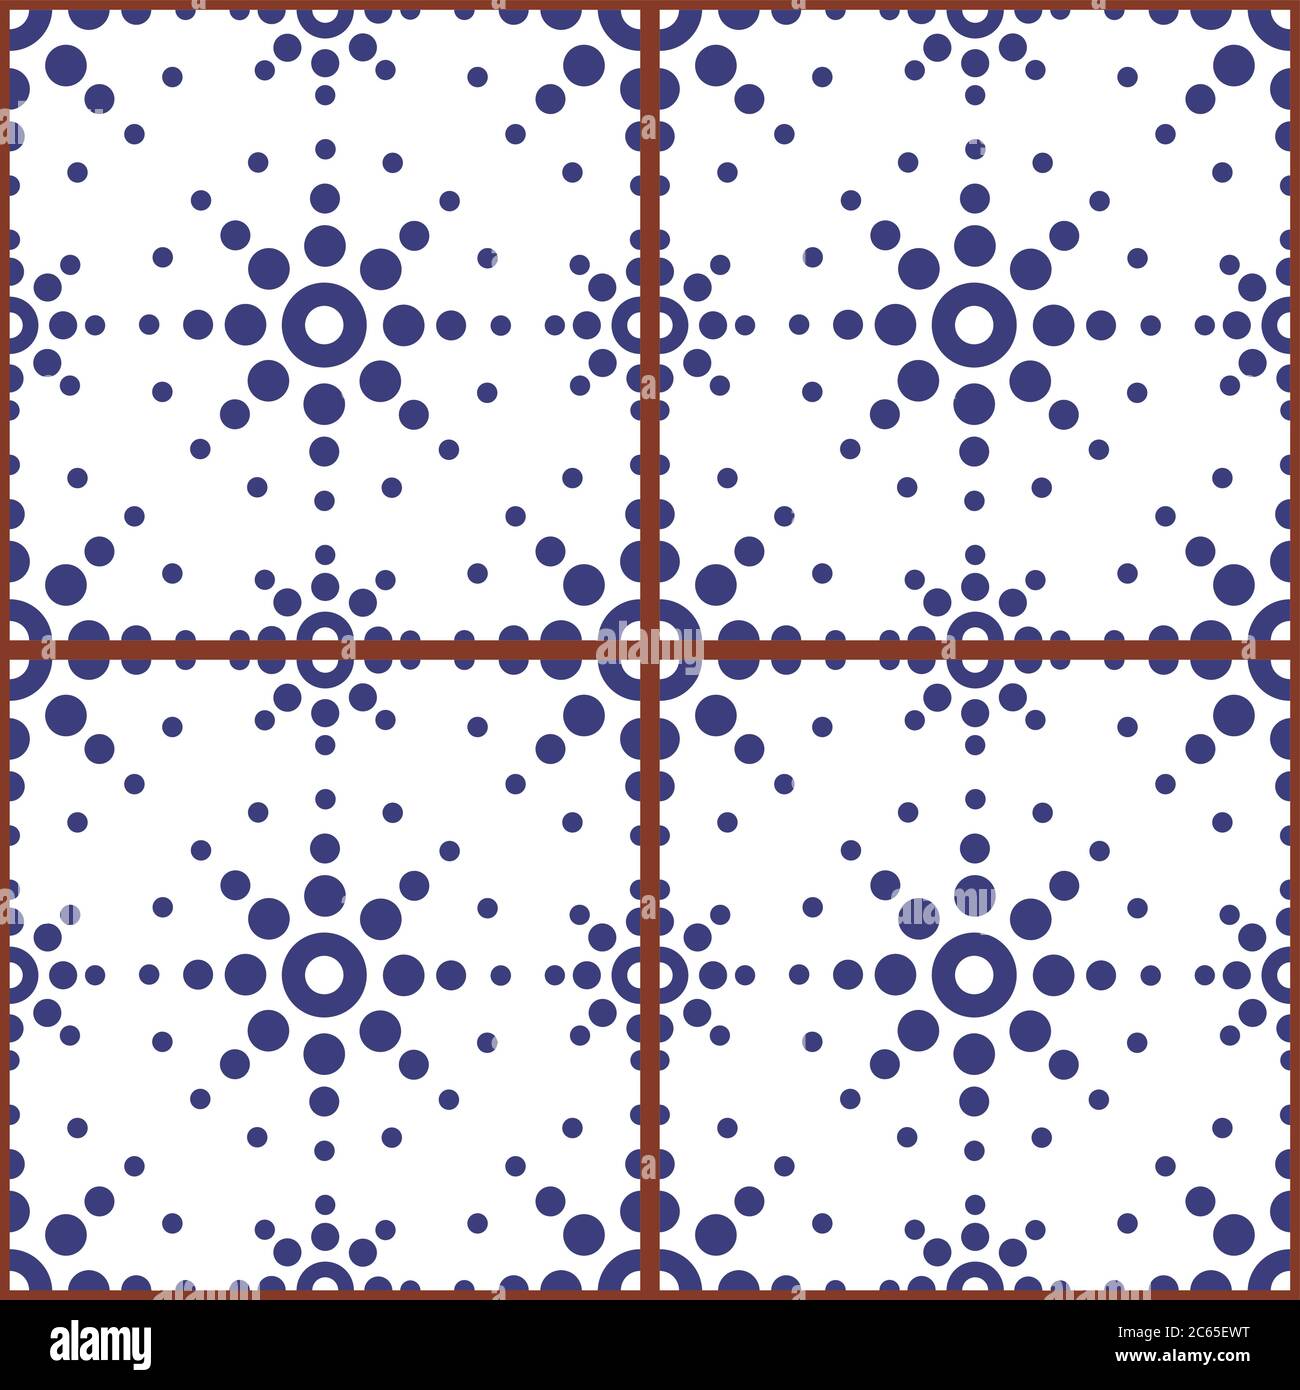 Moroccan geometric seamless vector tile pattern with dot art, navy blue repetitive design Stock Vector